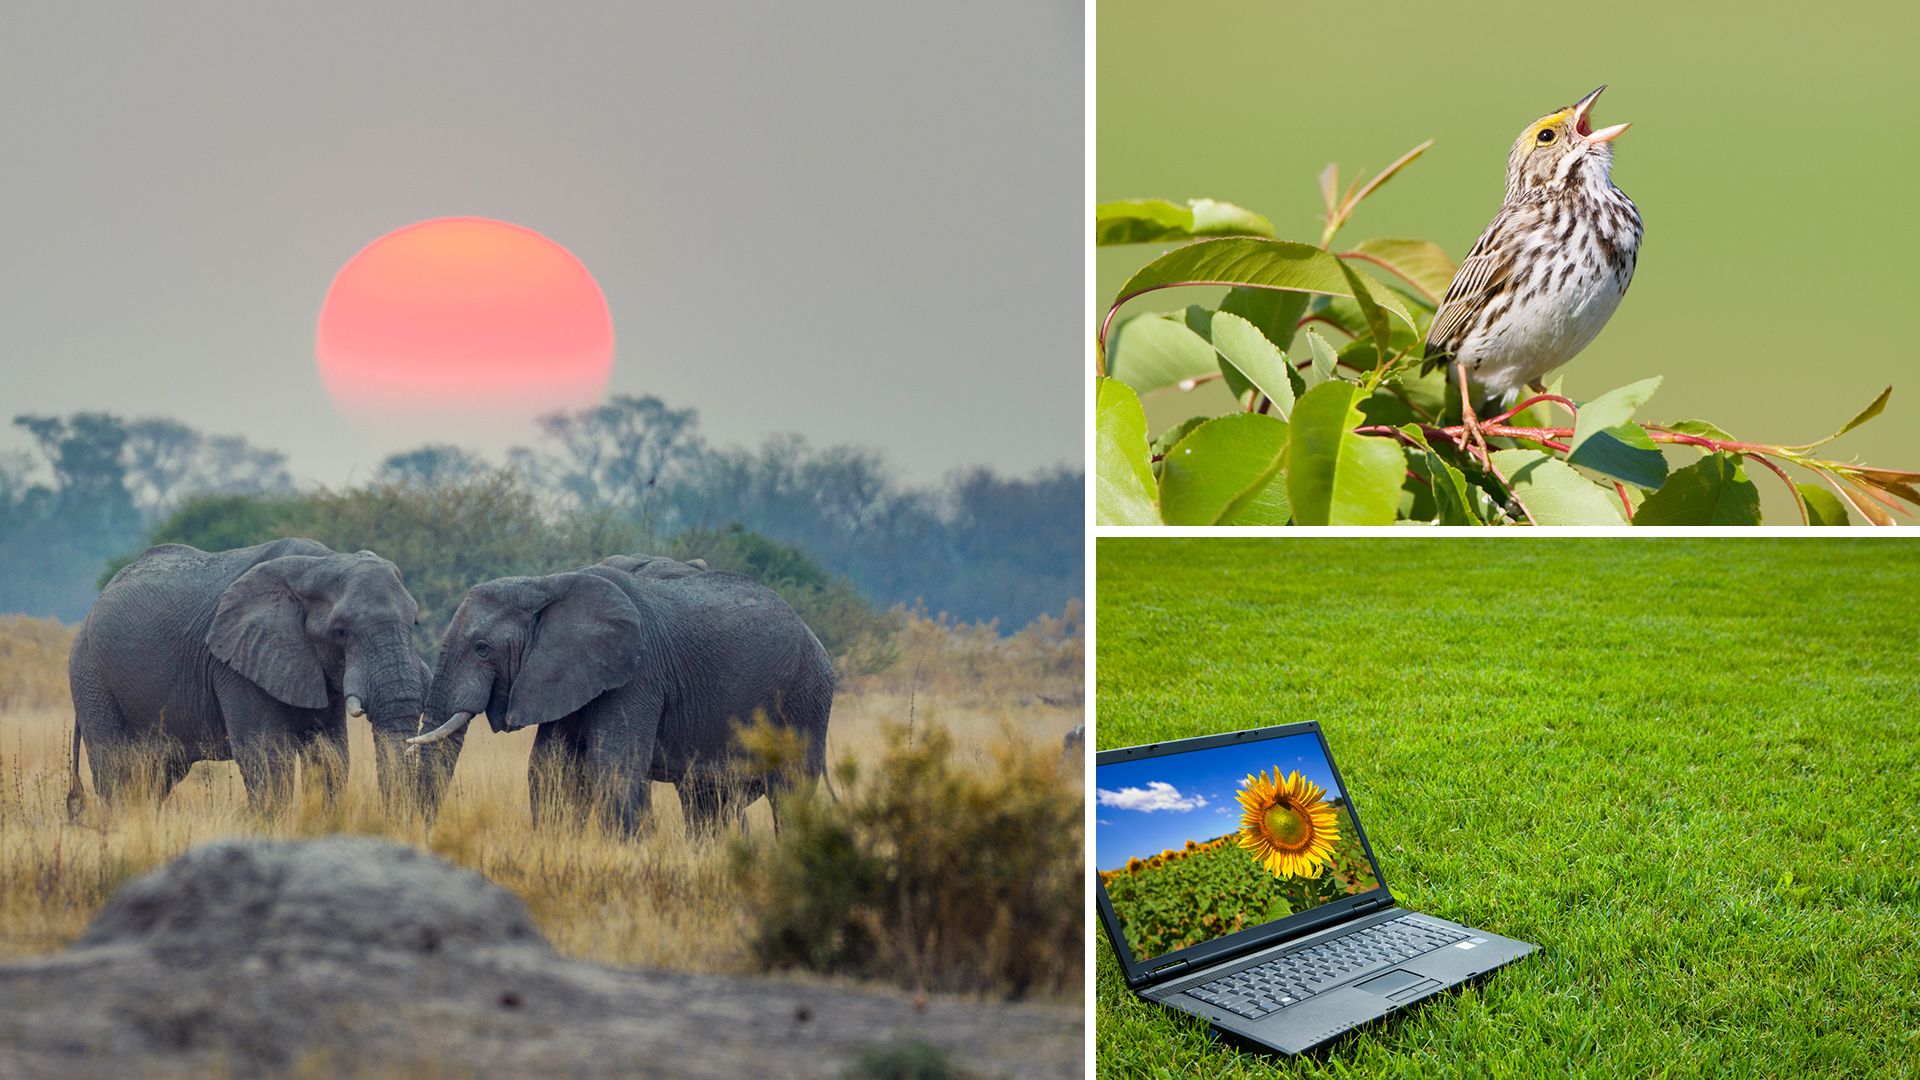 Split screen photo of a singing bird, a laptop and two elephants